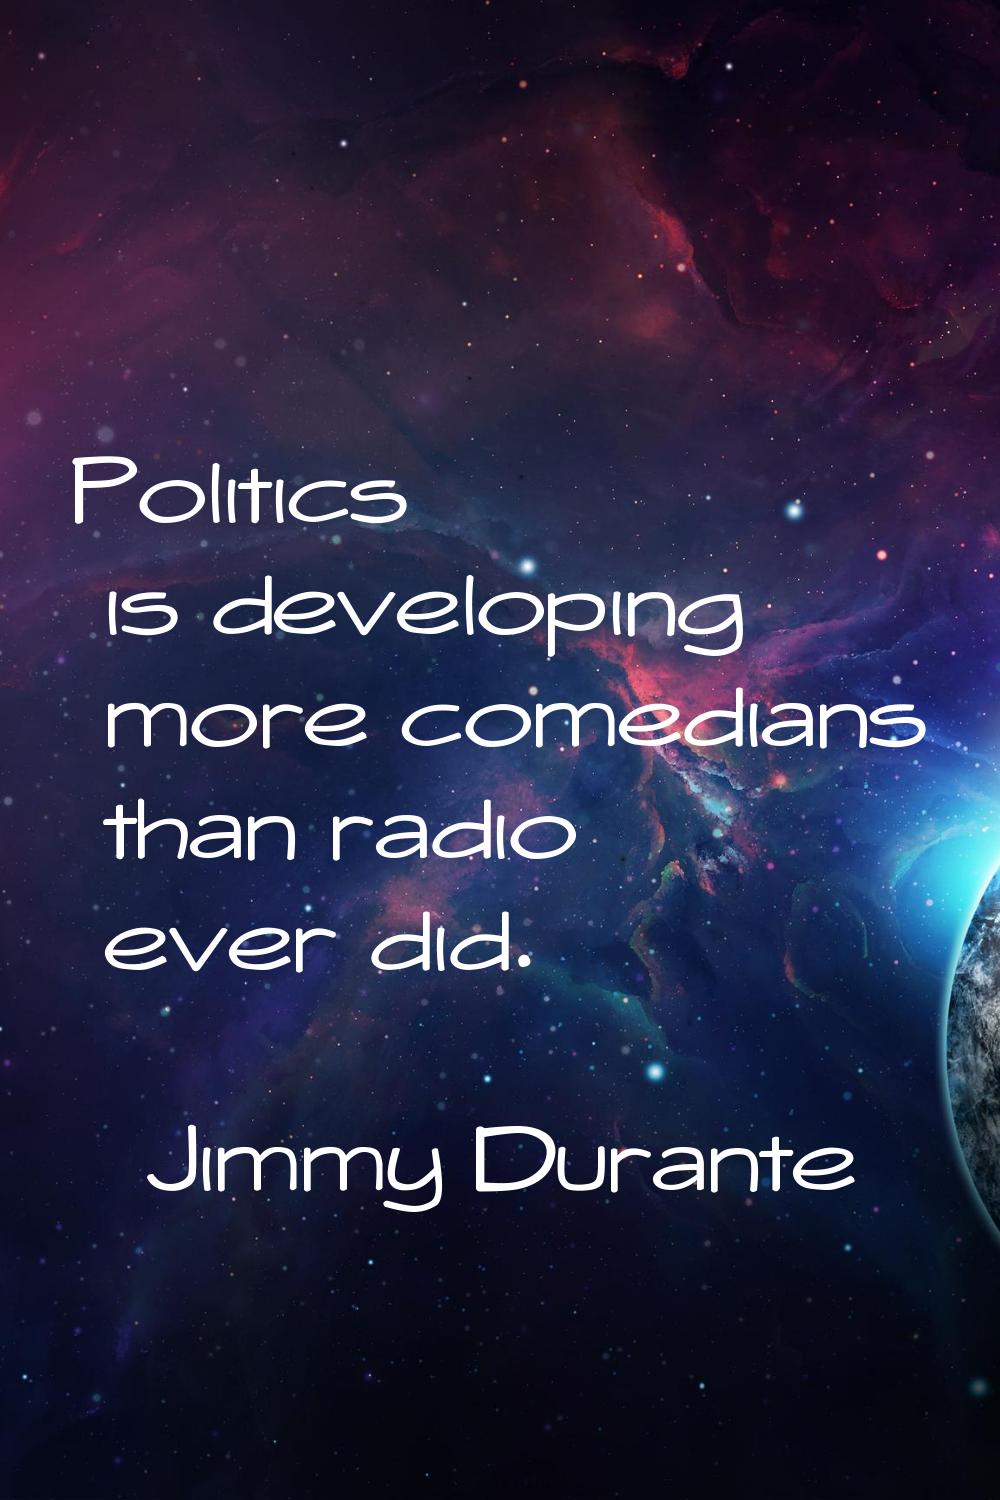 Politics is developing more comedians than radio ever did.